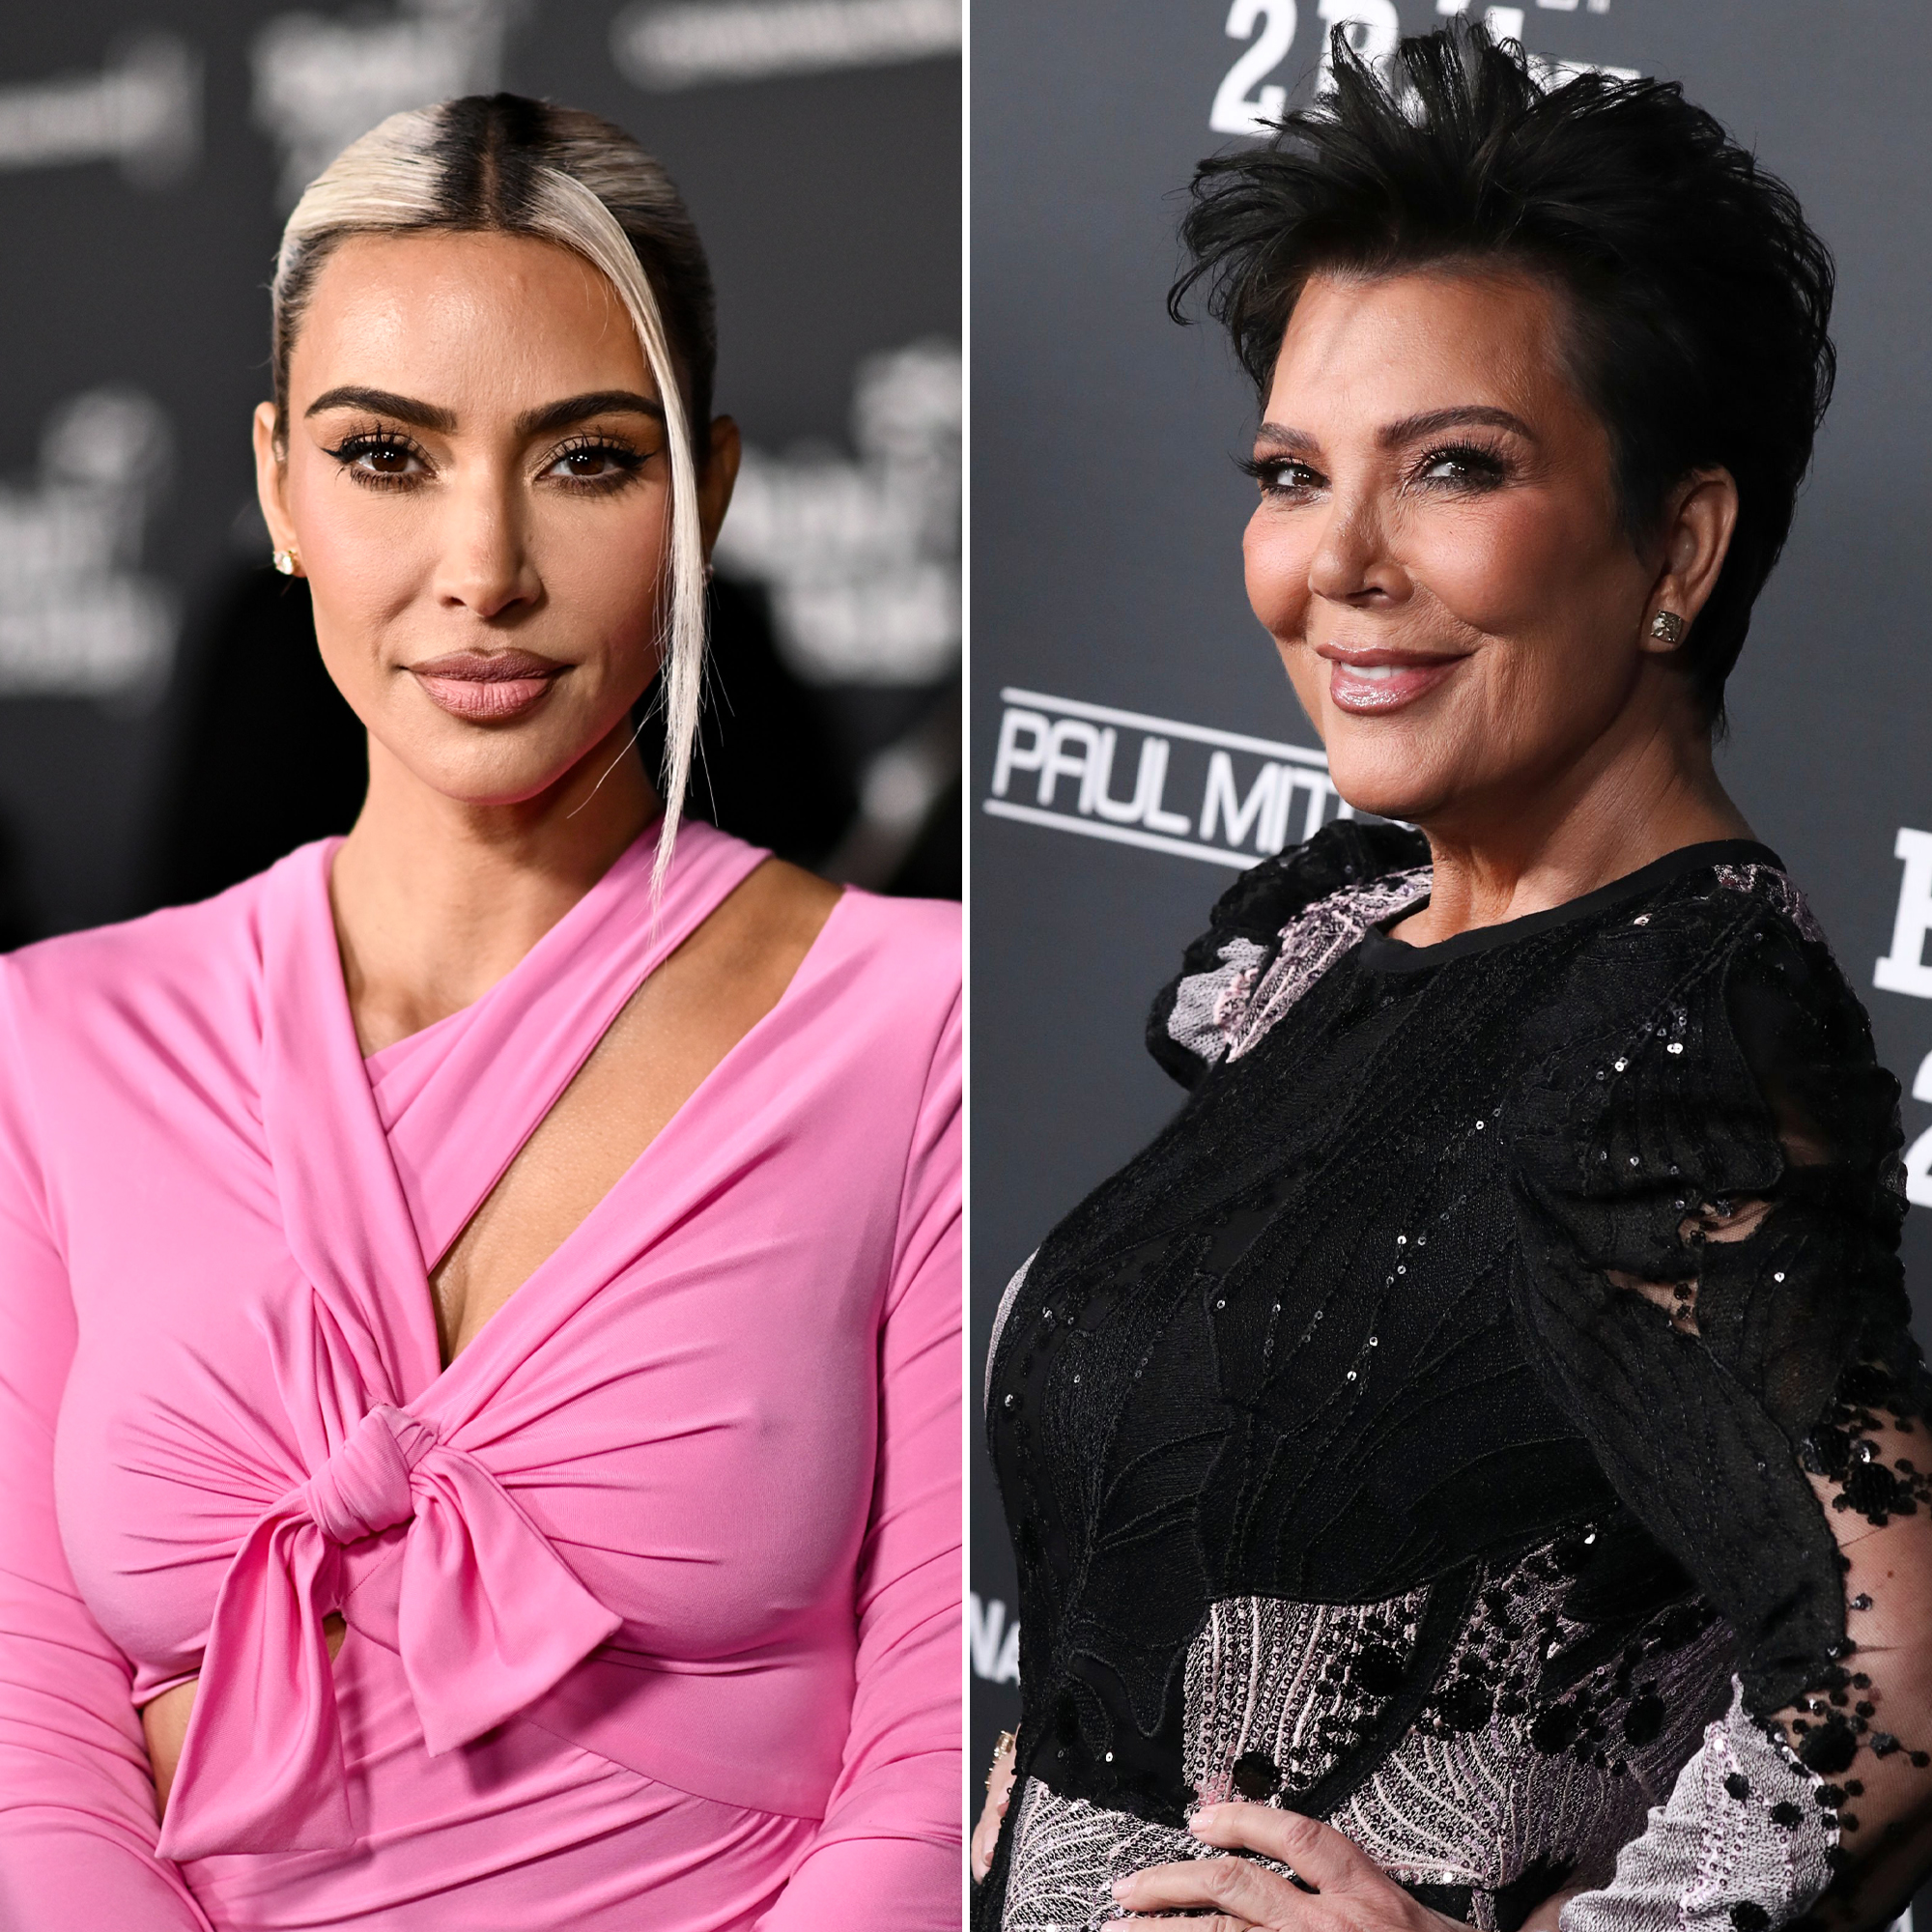 10 Most Expensive Things The Kardashians & Jenners Have Bought Their Kids